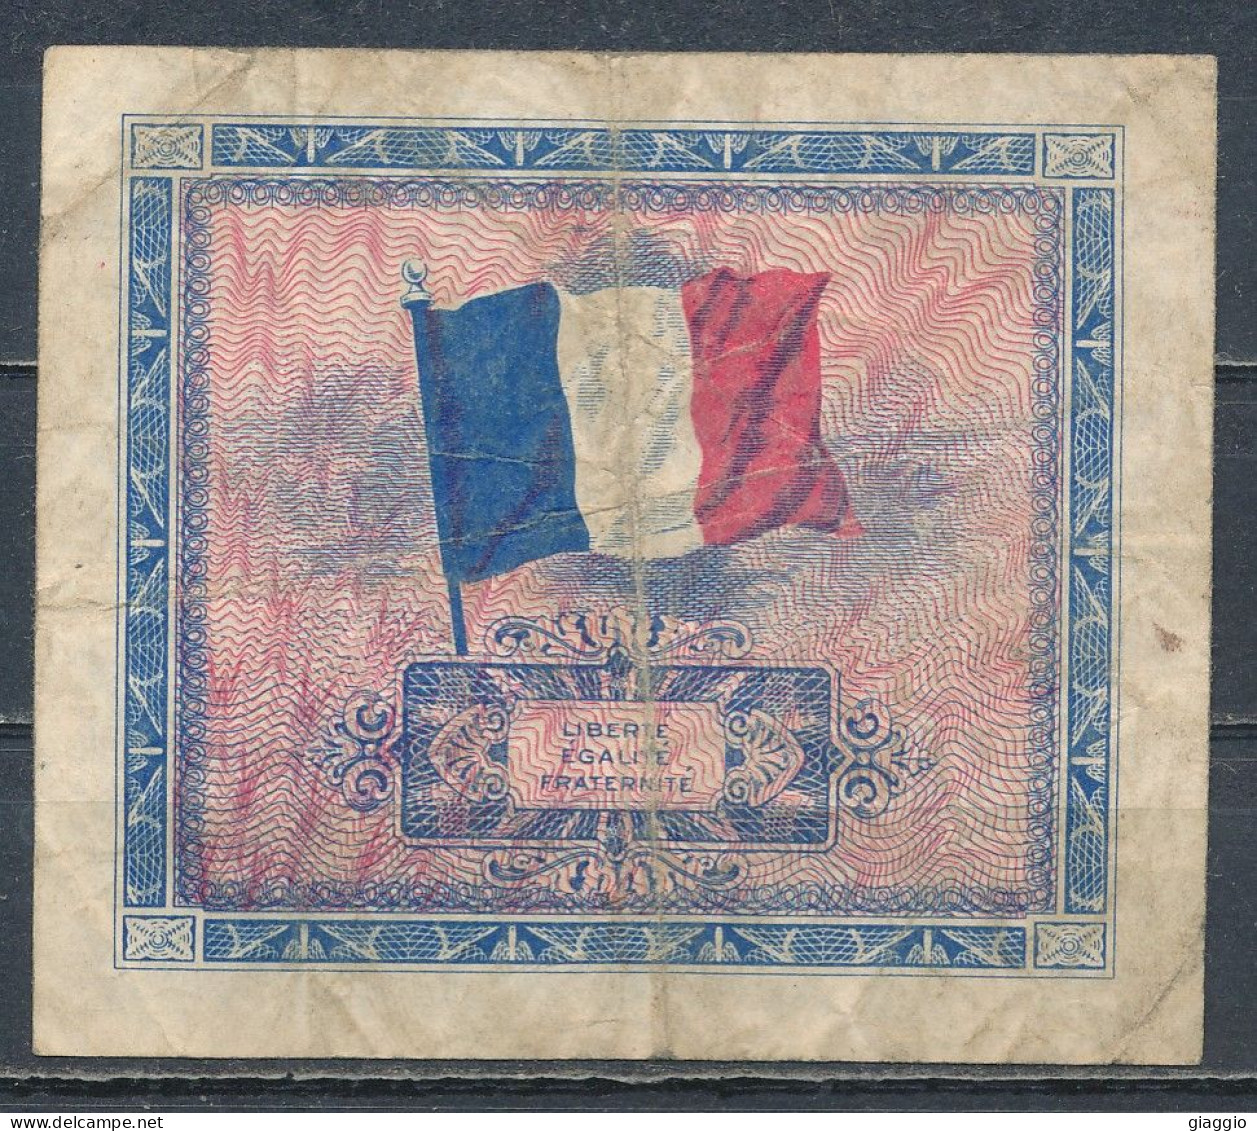 °°° FRANCE 2 FRANCS ALLIED MILITARY CURRENCY 1944 °°° - 1944 Drapeau/France